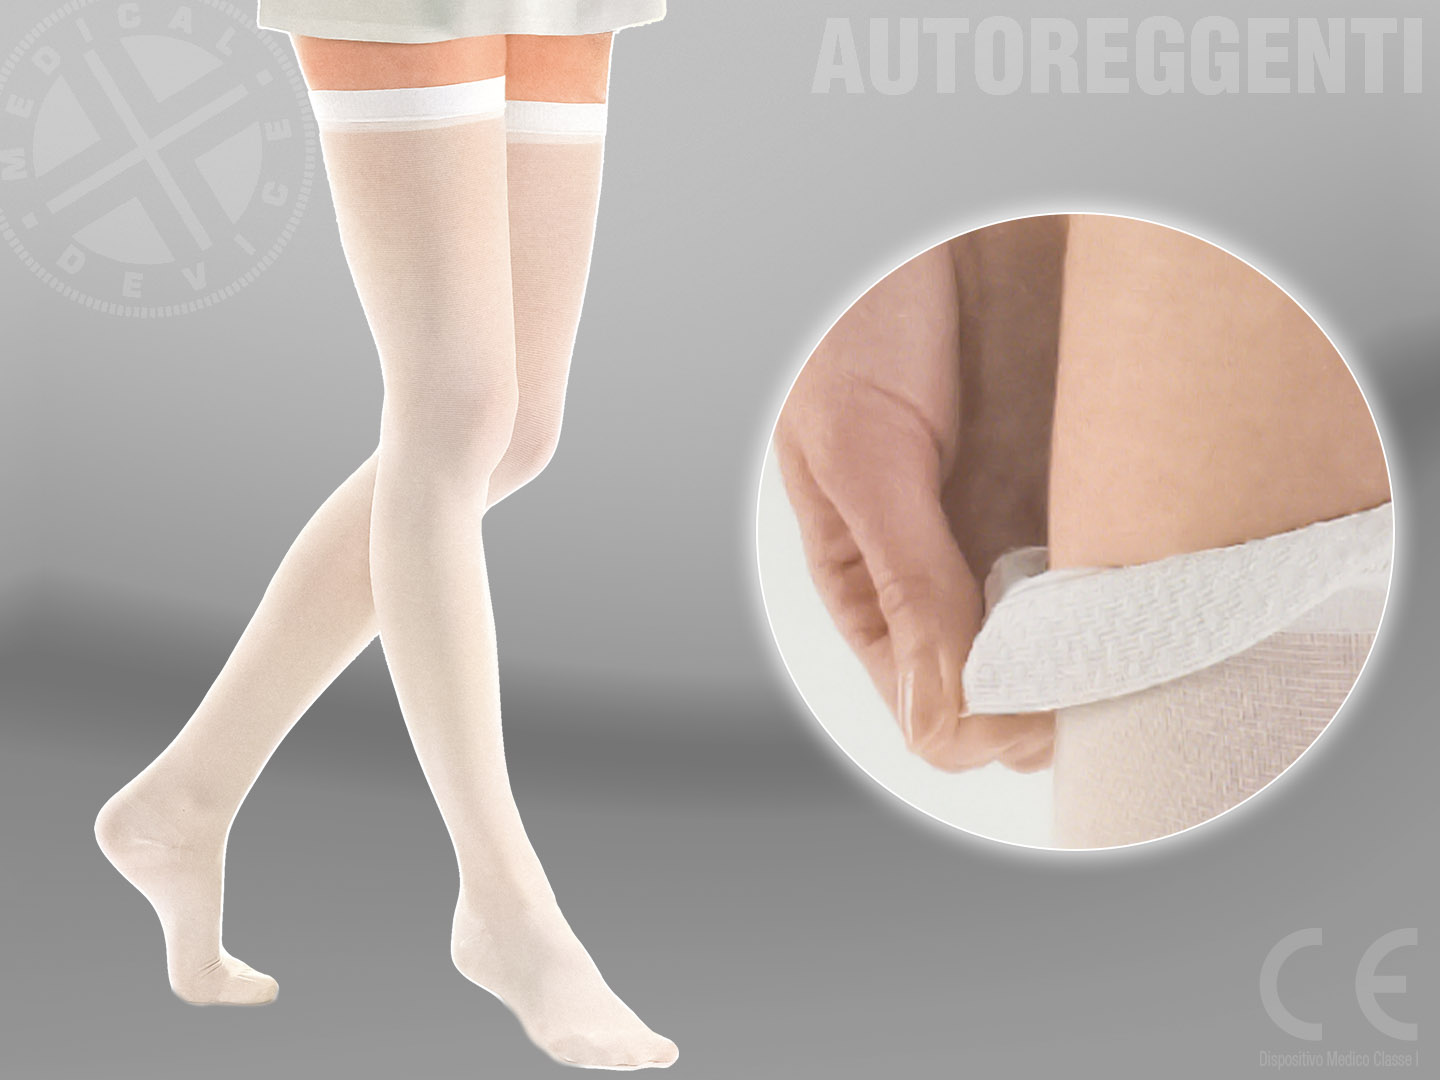 elly anti-embolism stay-up stockings apply the clinically-proven graduated pressure